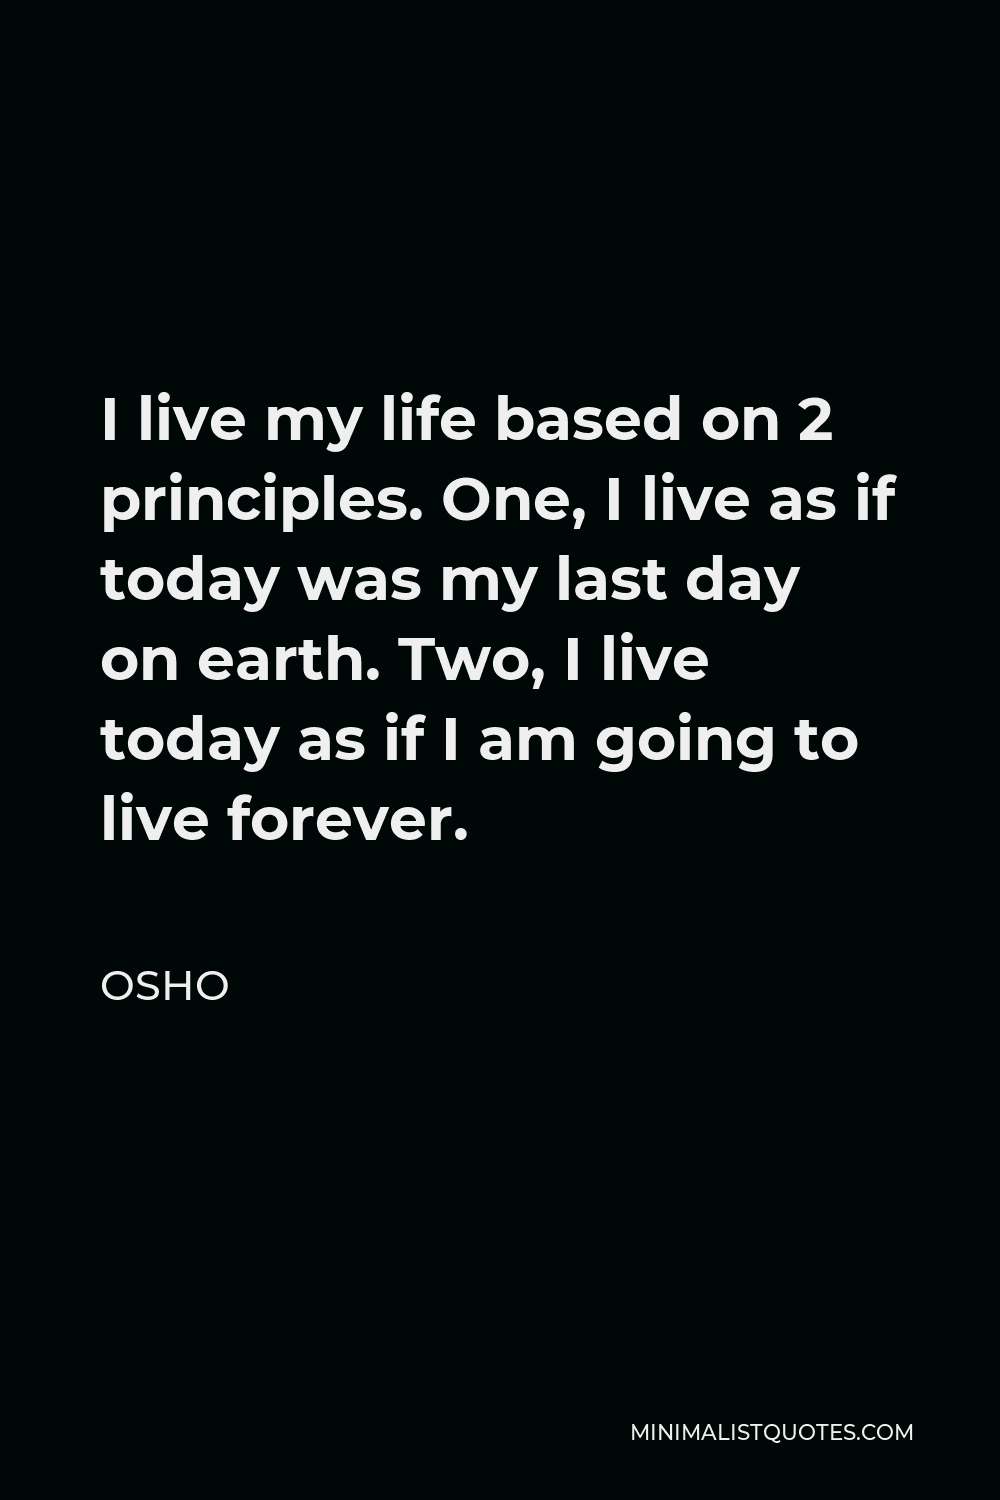 Osho Quote I Live My Life Based On 2 Principles One I Live As If Today Was My Last Day On Earth Two I Live Today As If I Am Going To